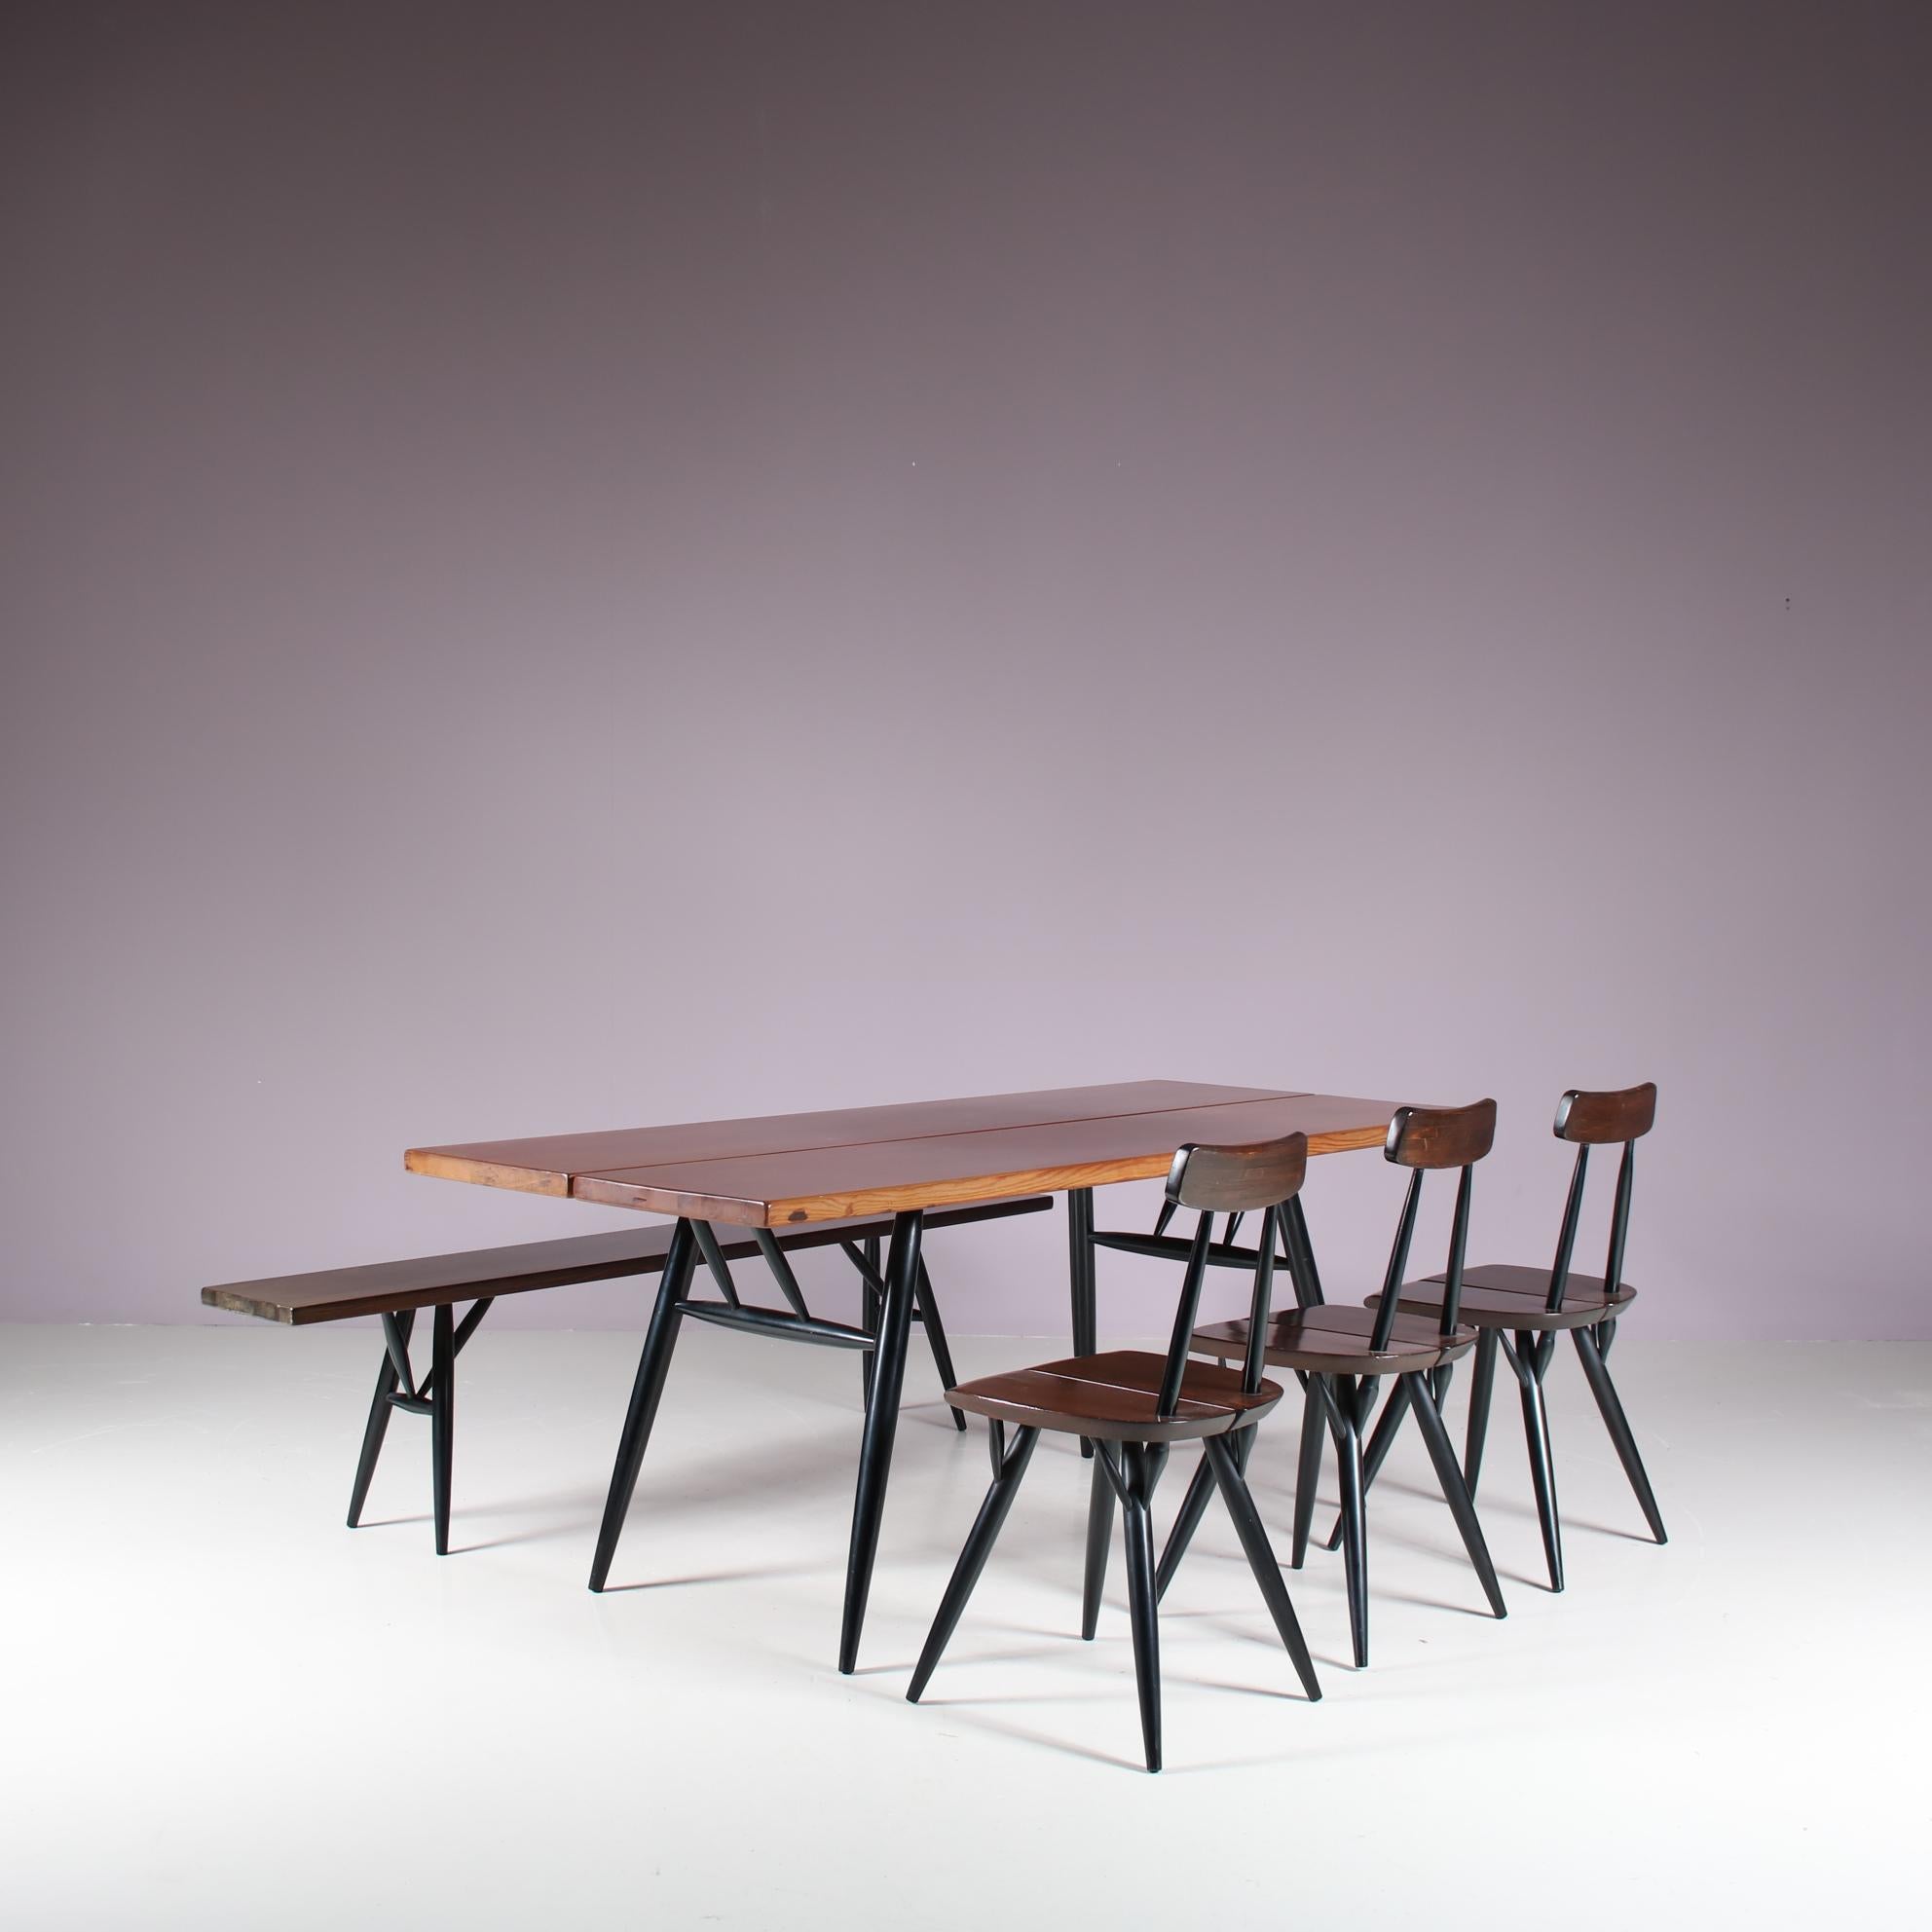 An outstanding “Pirkka” dining set designed by Ilmari Tapiovaara, manufactured by Laukaan Puu in Finland around 1950.

This impressive set contains one table, three chairs and one bench, all made from the highest quality pine wood with a warm brown